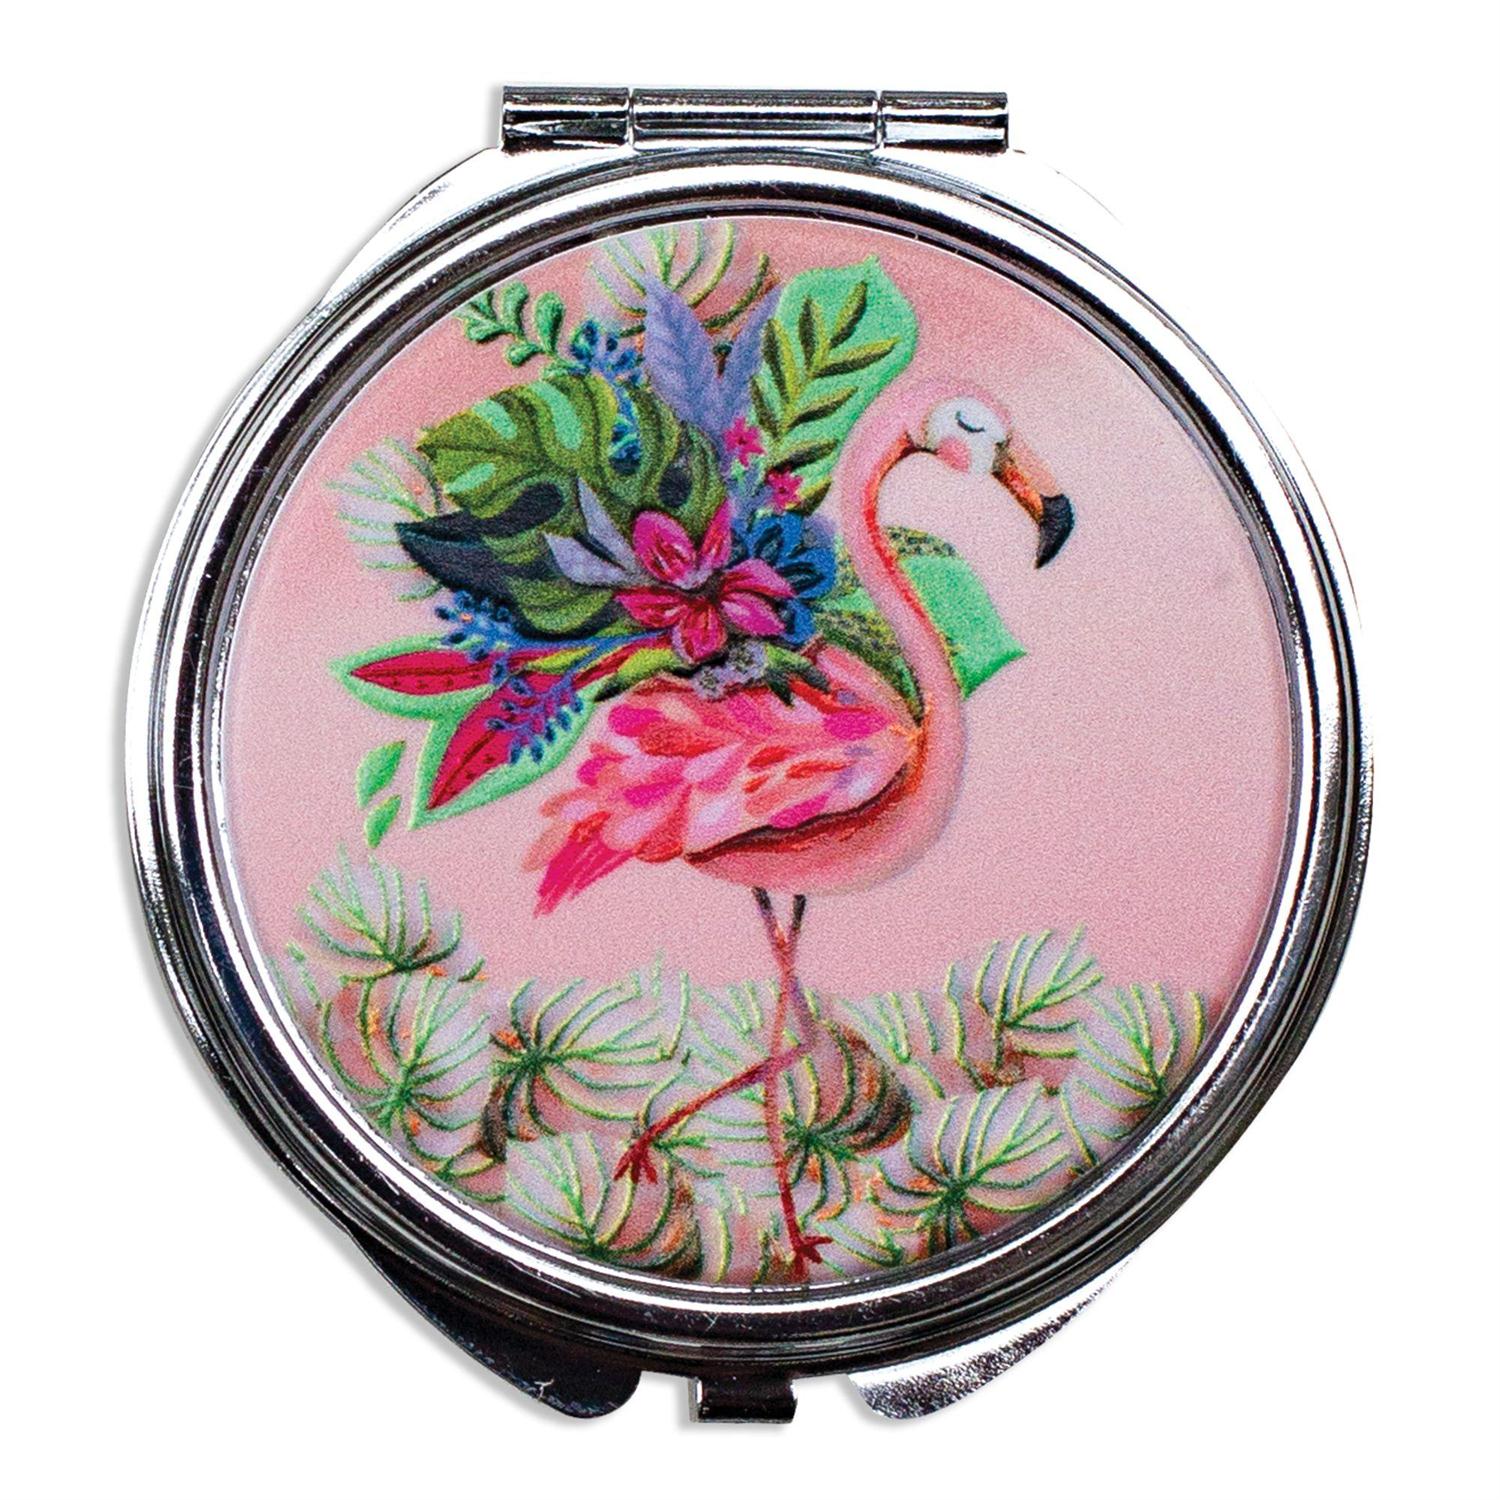 Colorful flamingo pill or compact trinket box from Allen Designs. Fits easily in purse or make-up bag.